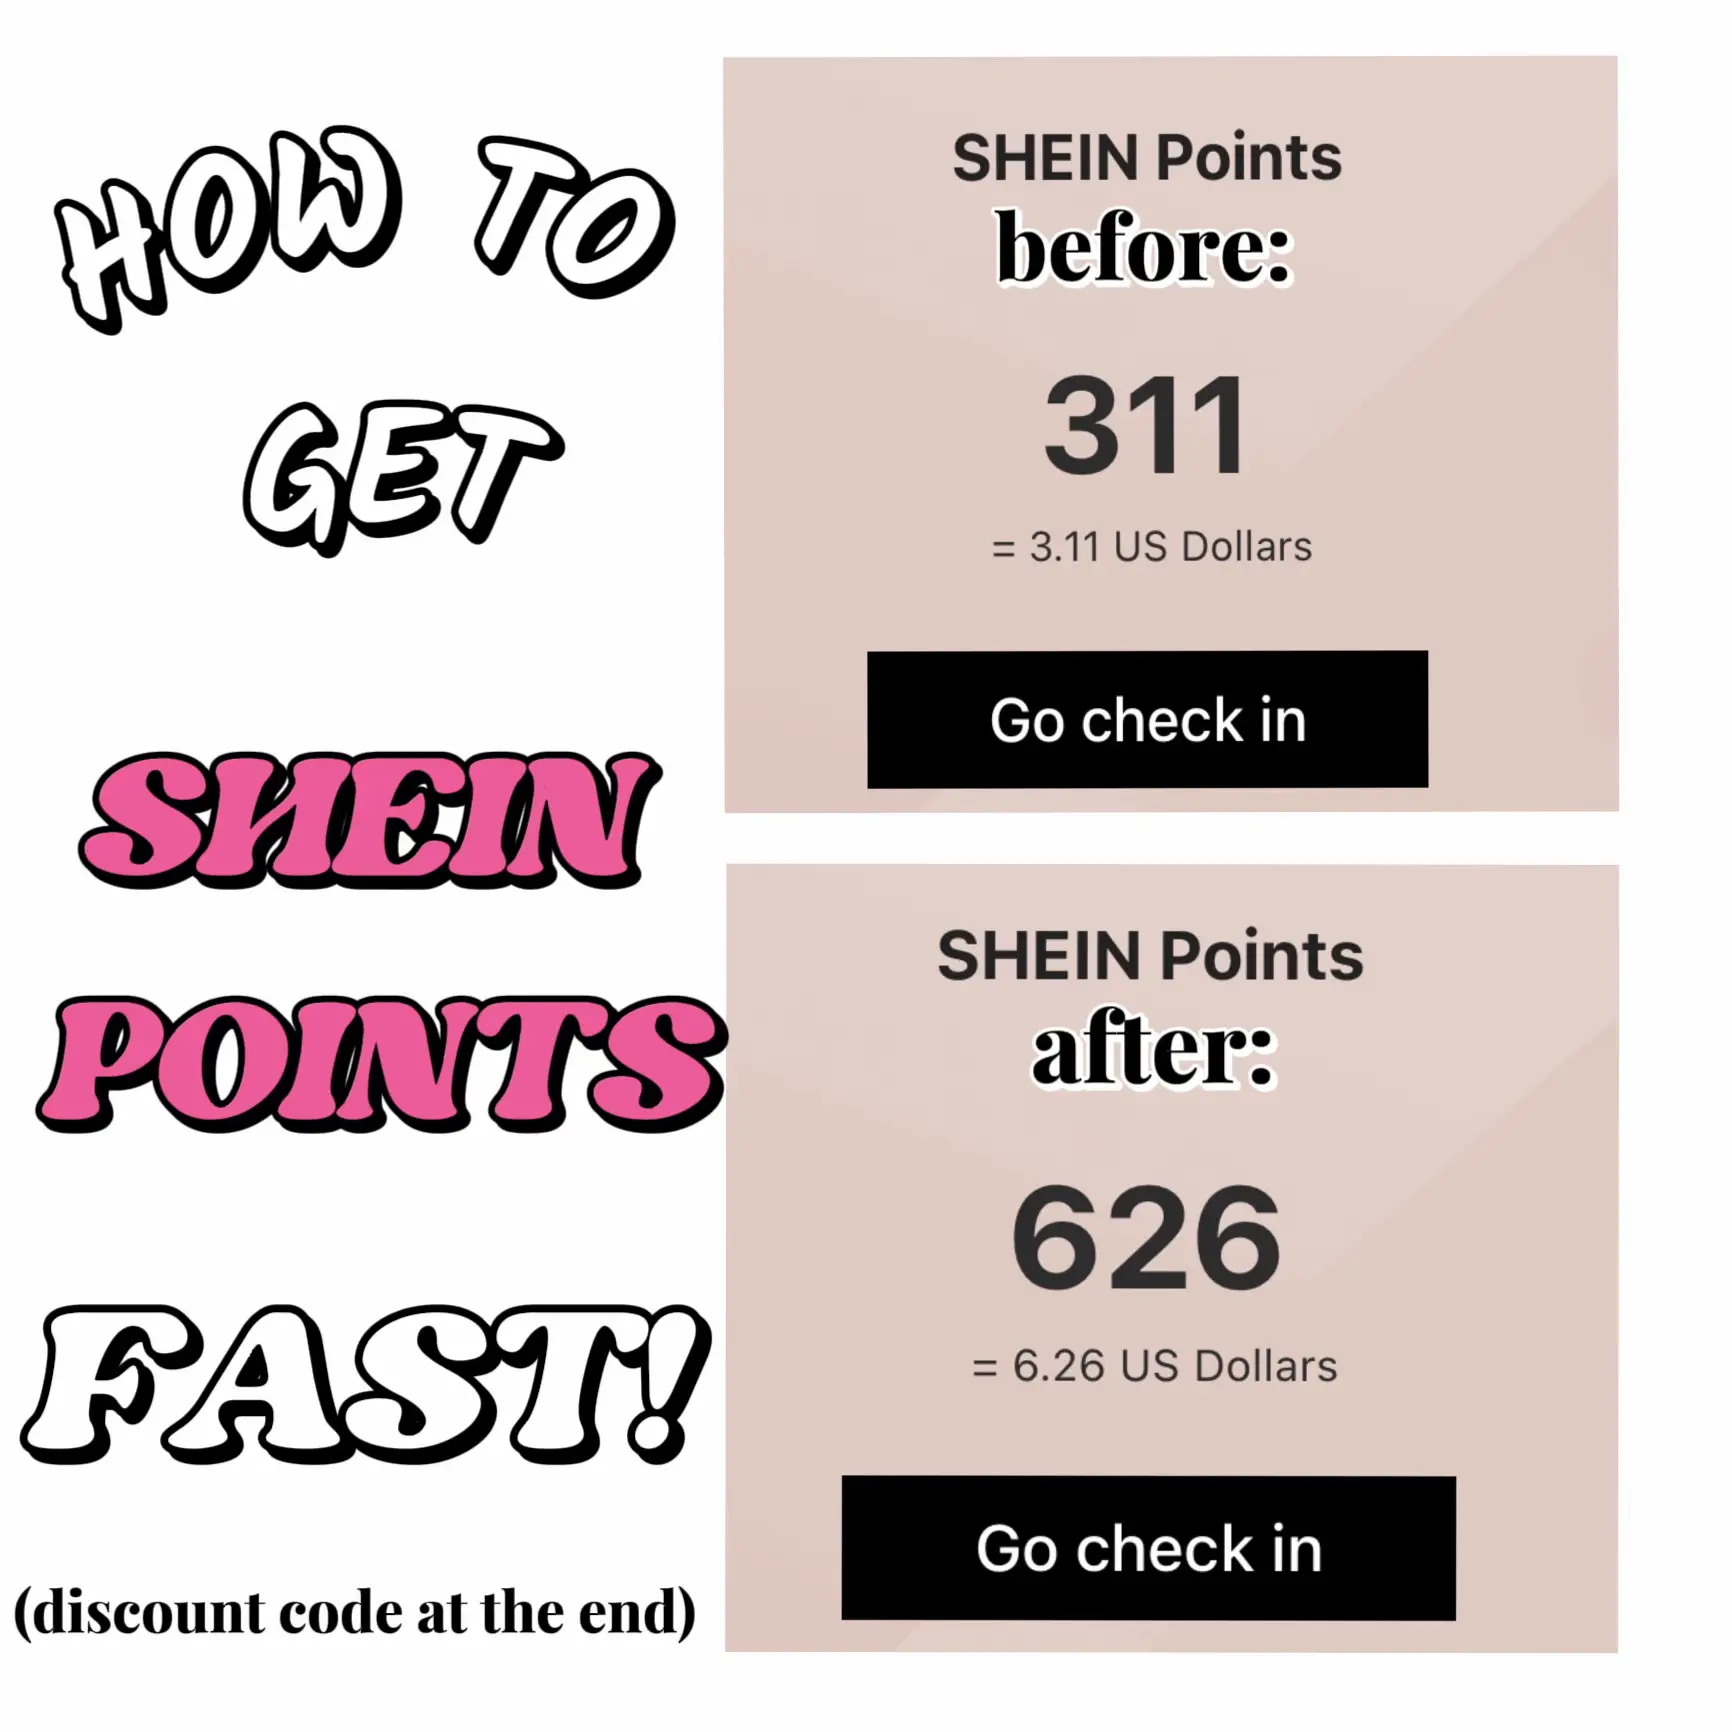 Stack Coupons on Shein, Save on Shein, Shein Savings, Shein Back to School  Outfits, Shein Reference in 2023